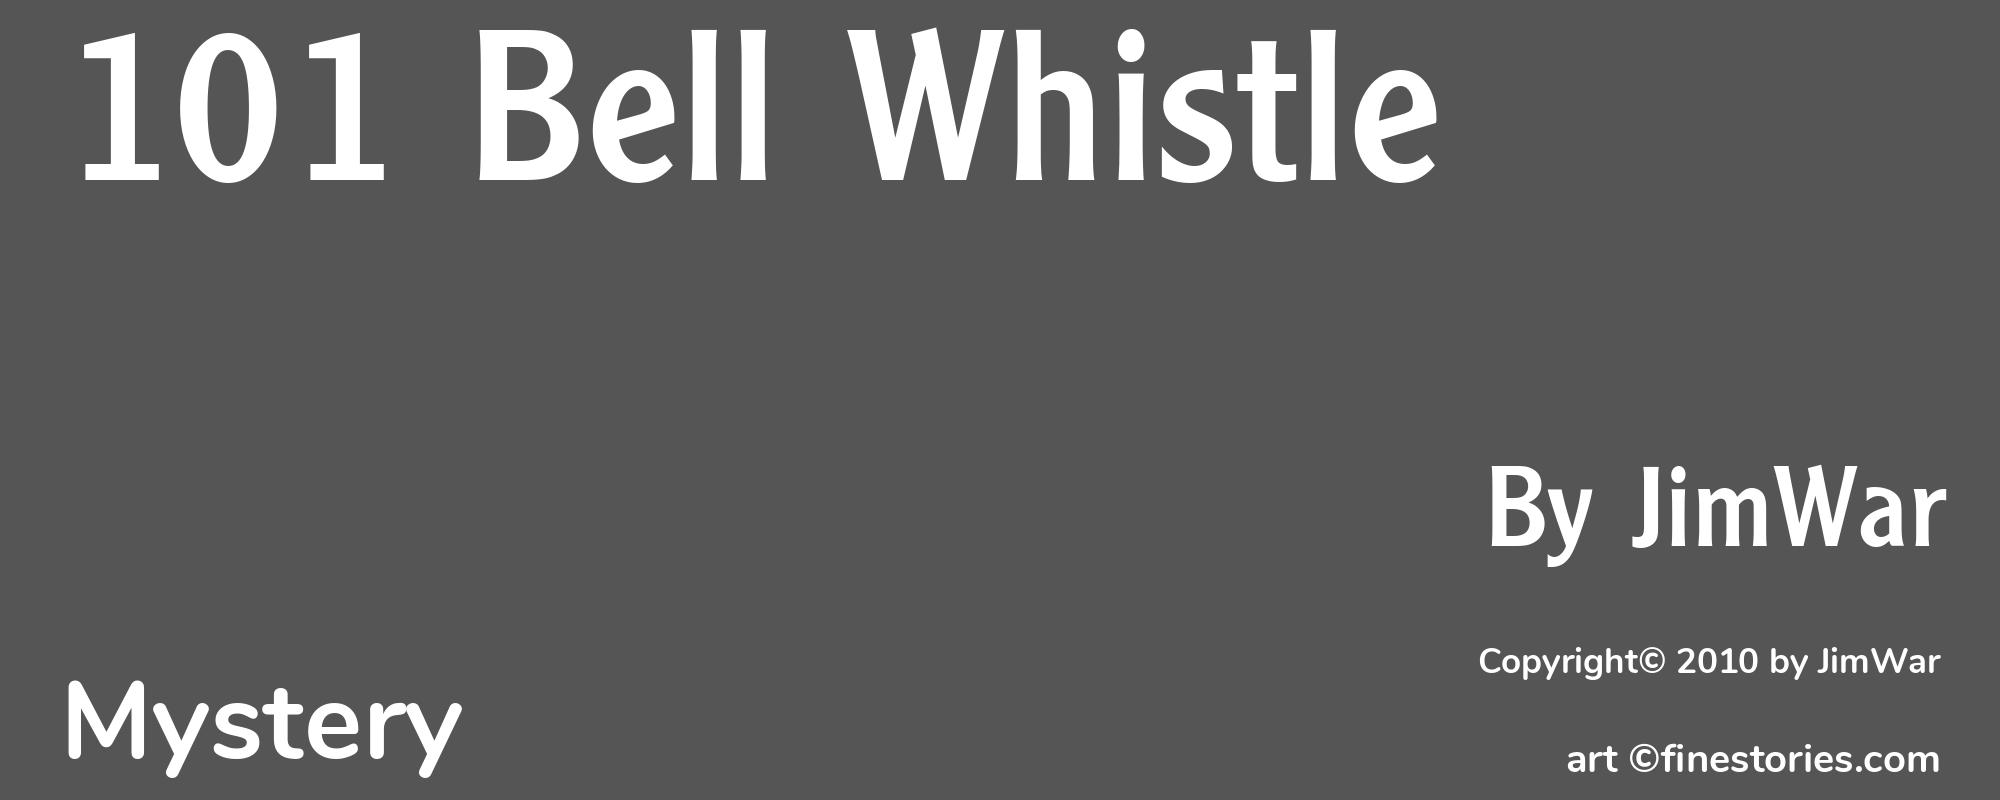 101 Bell Whistle - Cover